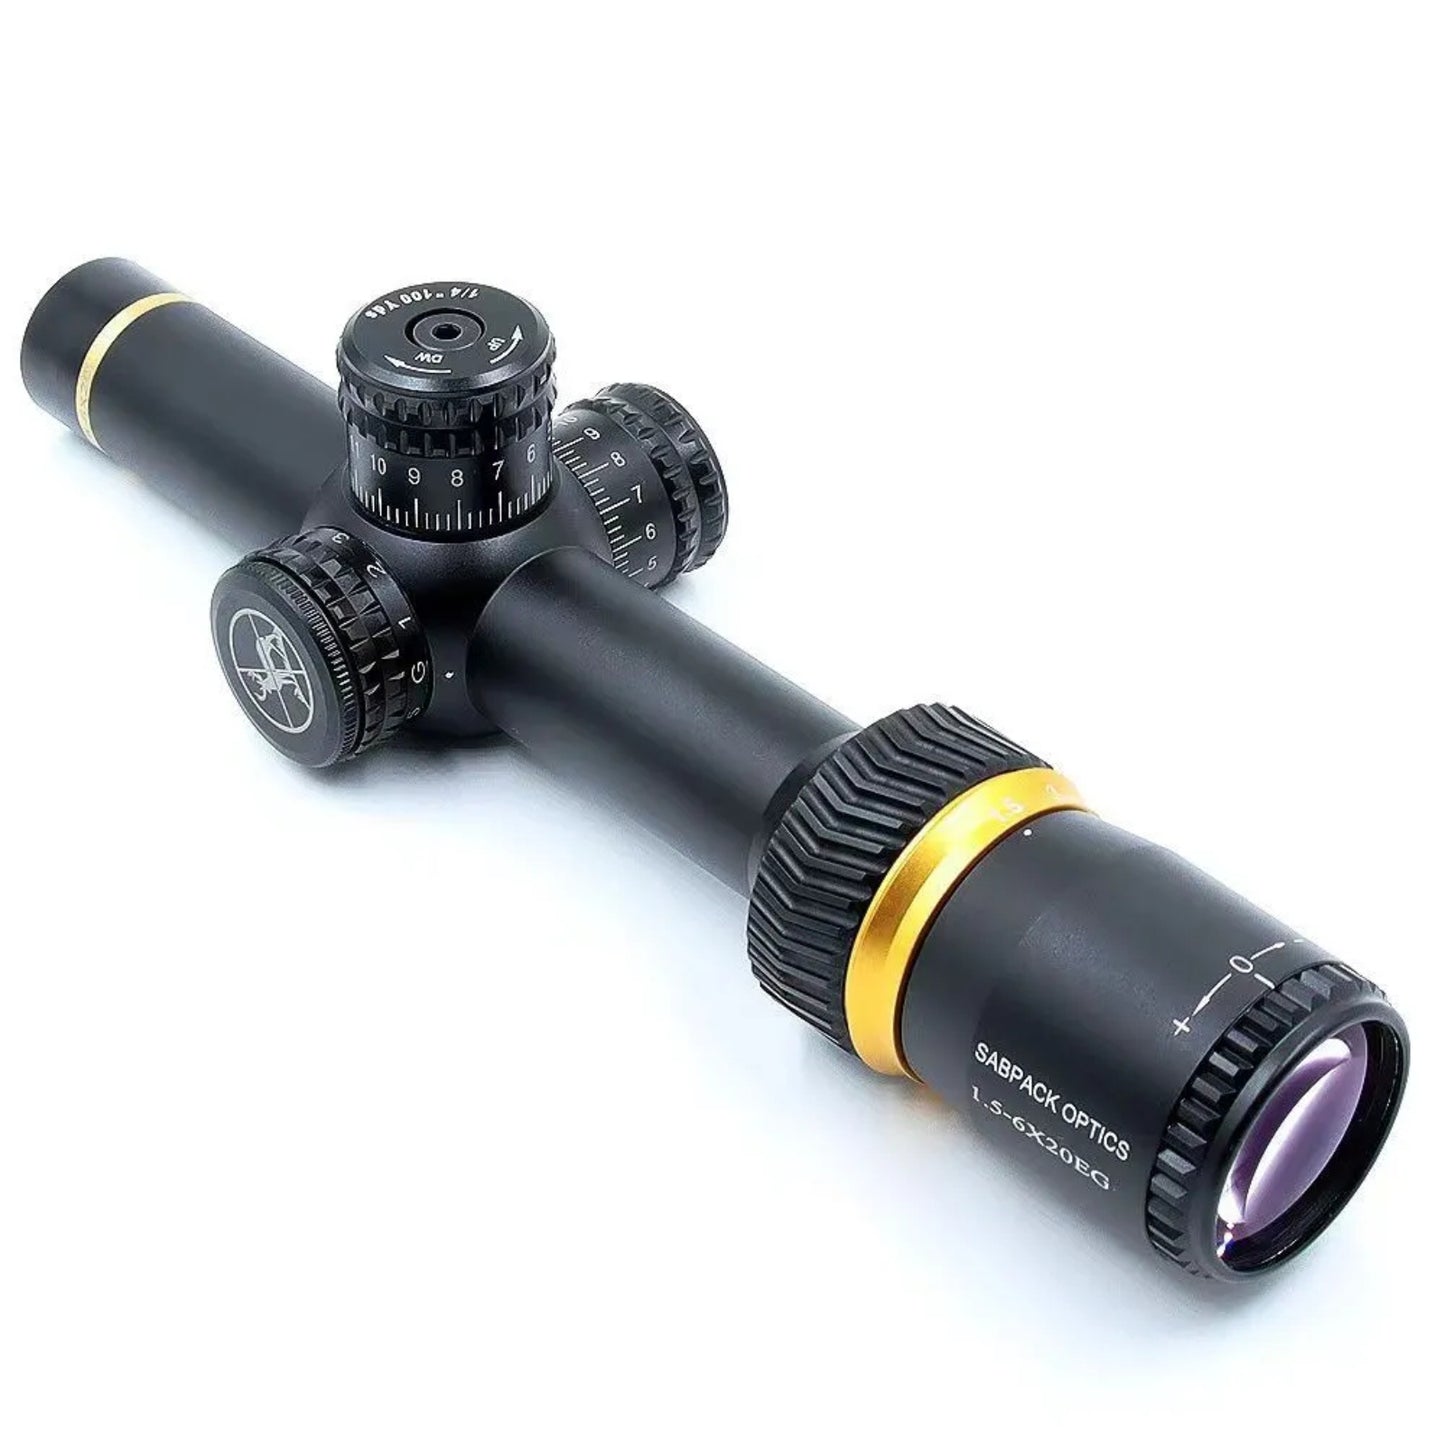 SABPACK 1.5-6x20 Rifle Scope illumination Reticle, Adjustable Objective, Second Focal Plane, 30mm Tube Riflescopes with strong mounts